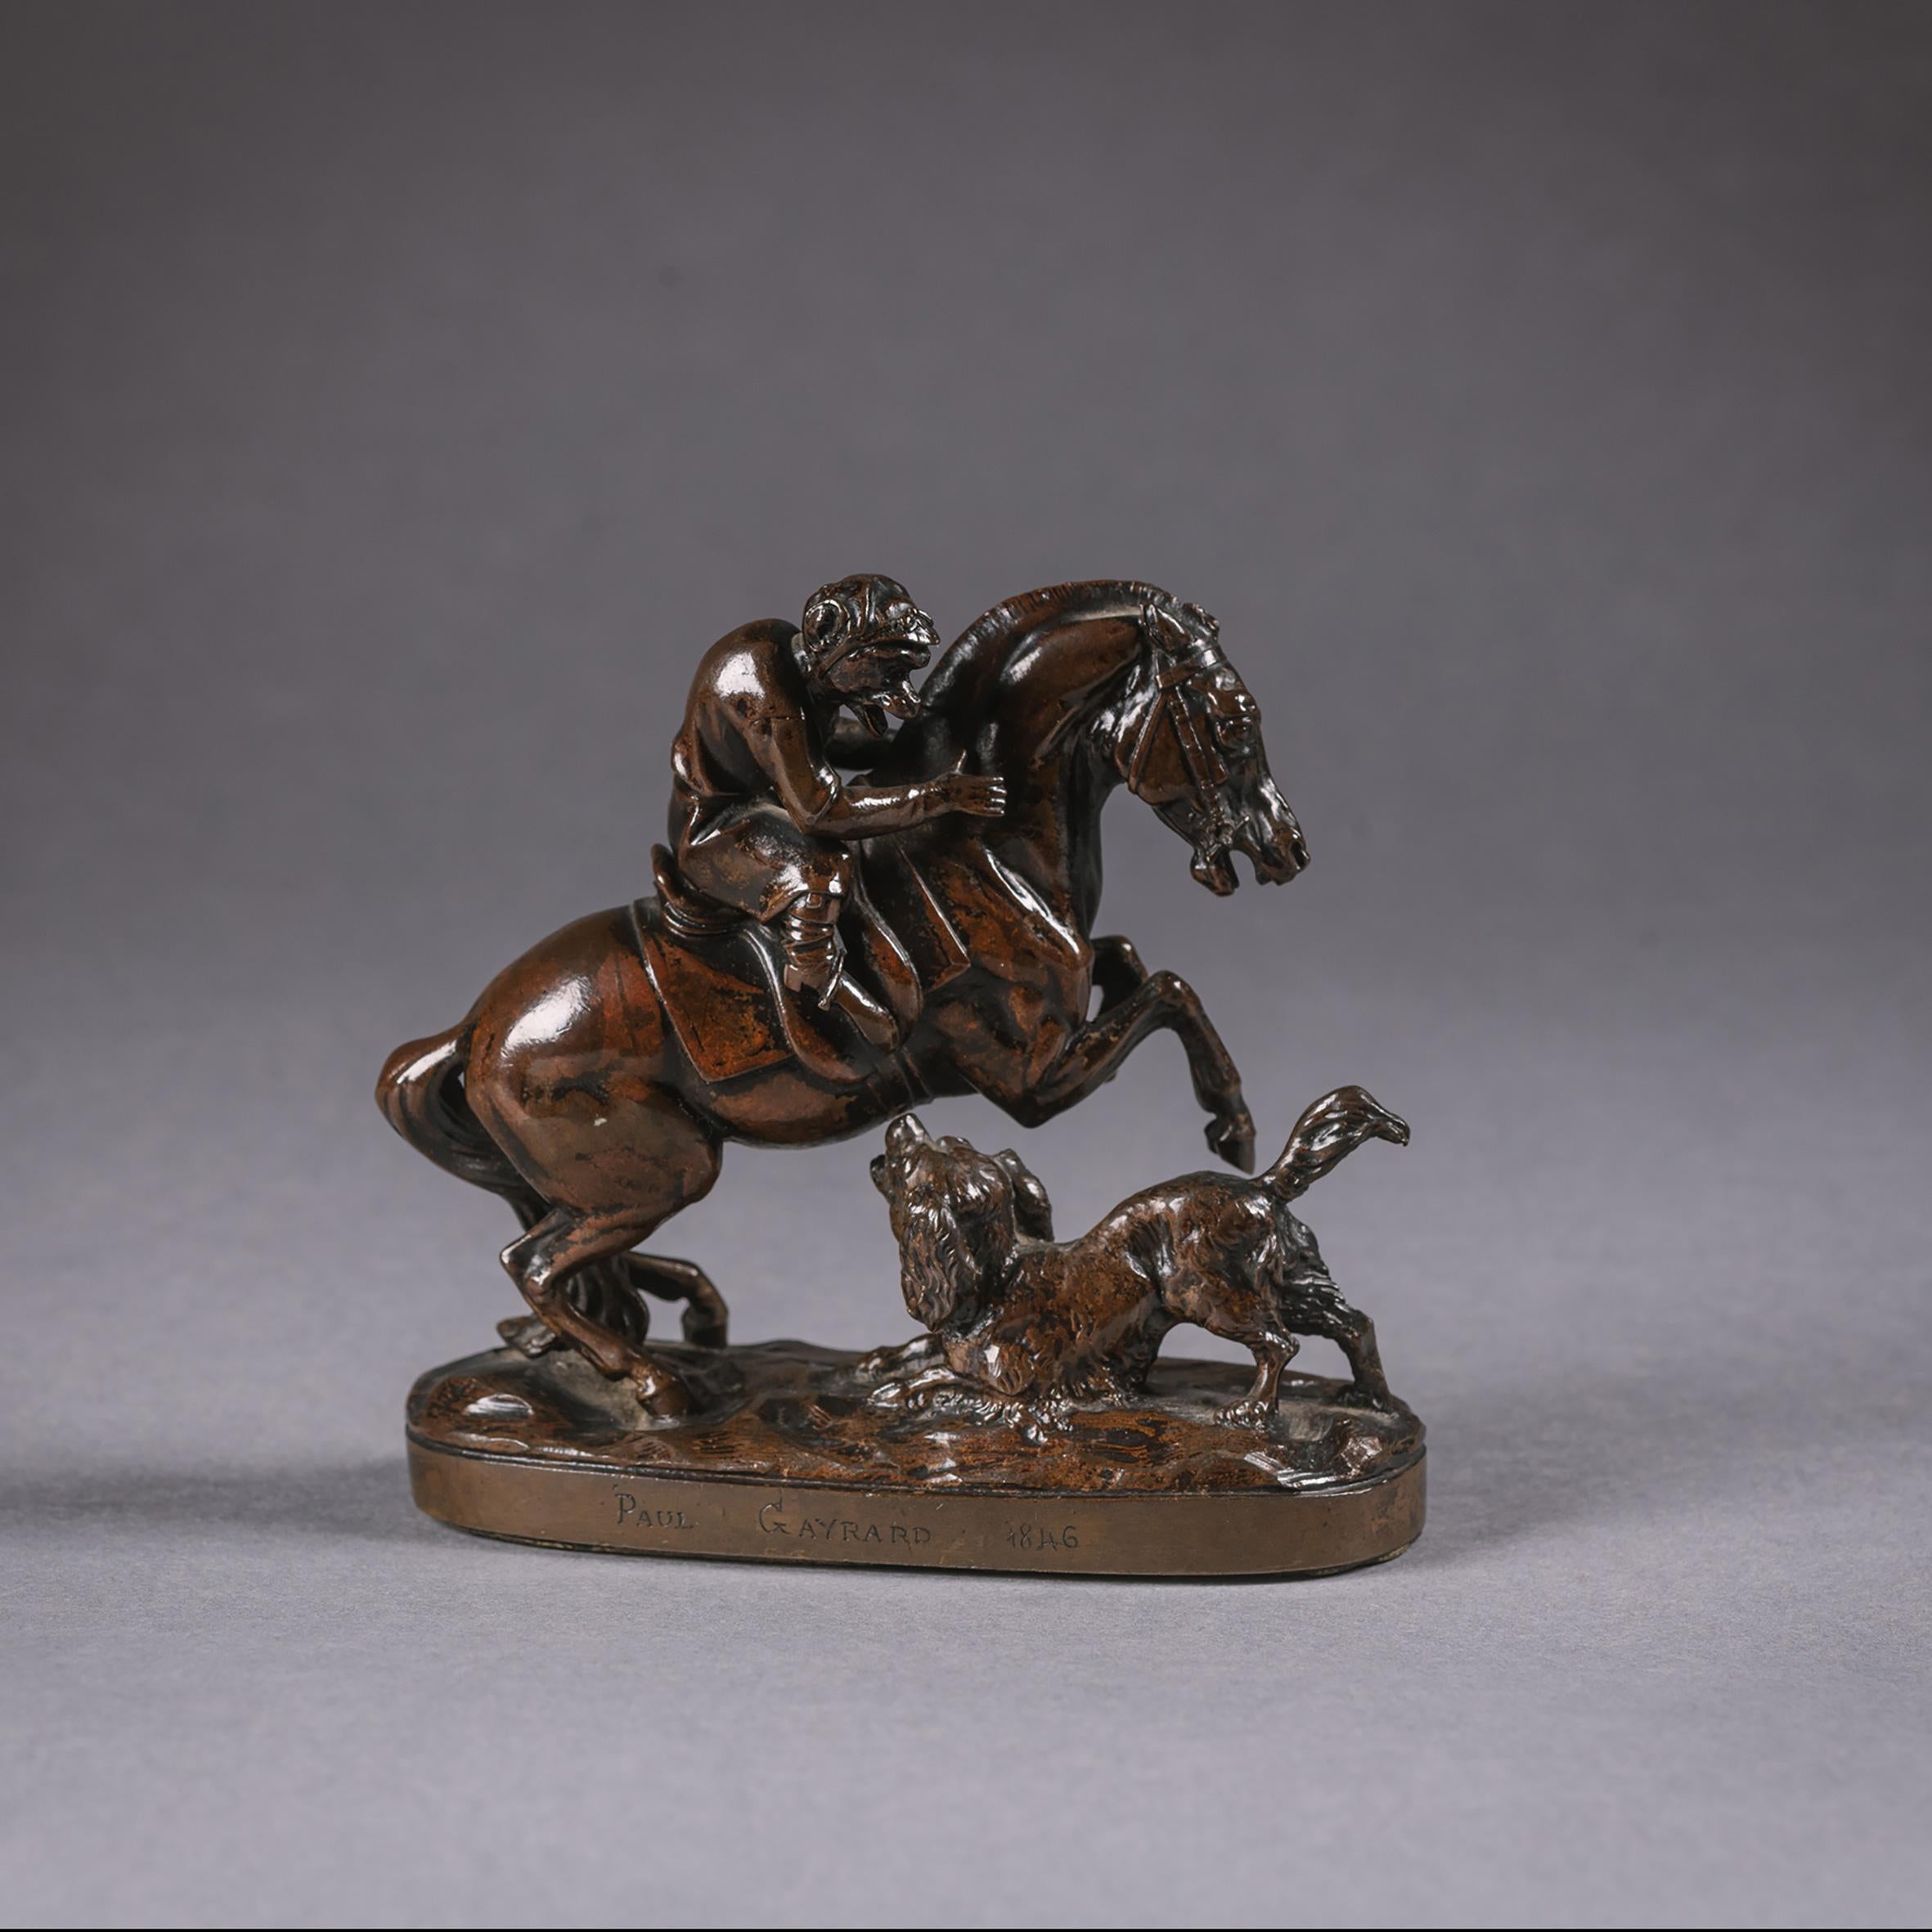 ‘The Monkey Rider’ – Paul Joseph Raymond Gayrard (1807 - 1855).

Signed to the base ‘Paul Gayrard’ and dated 1846. 

A rare patinated bronze group of a monkey in the guise of a Jockey riding a racehorse, startled by a barking dog at his feet. 
